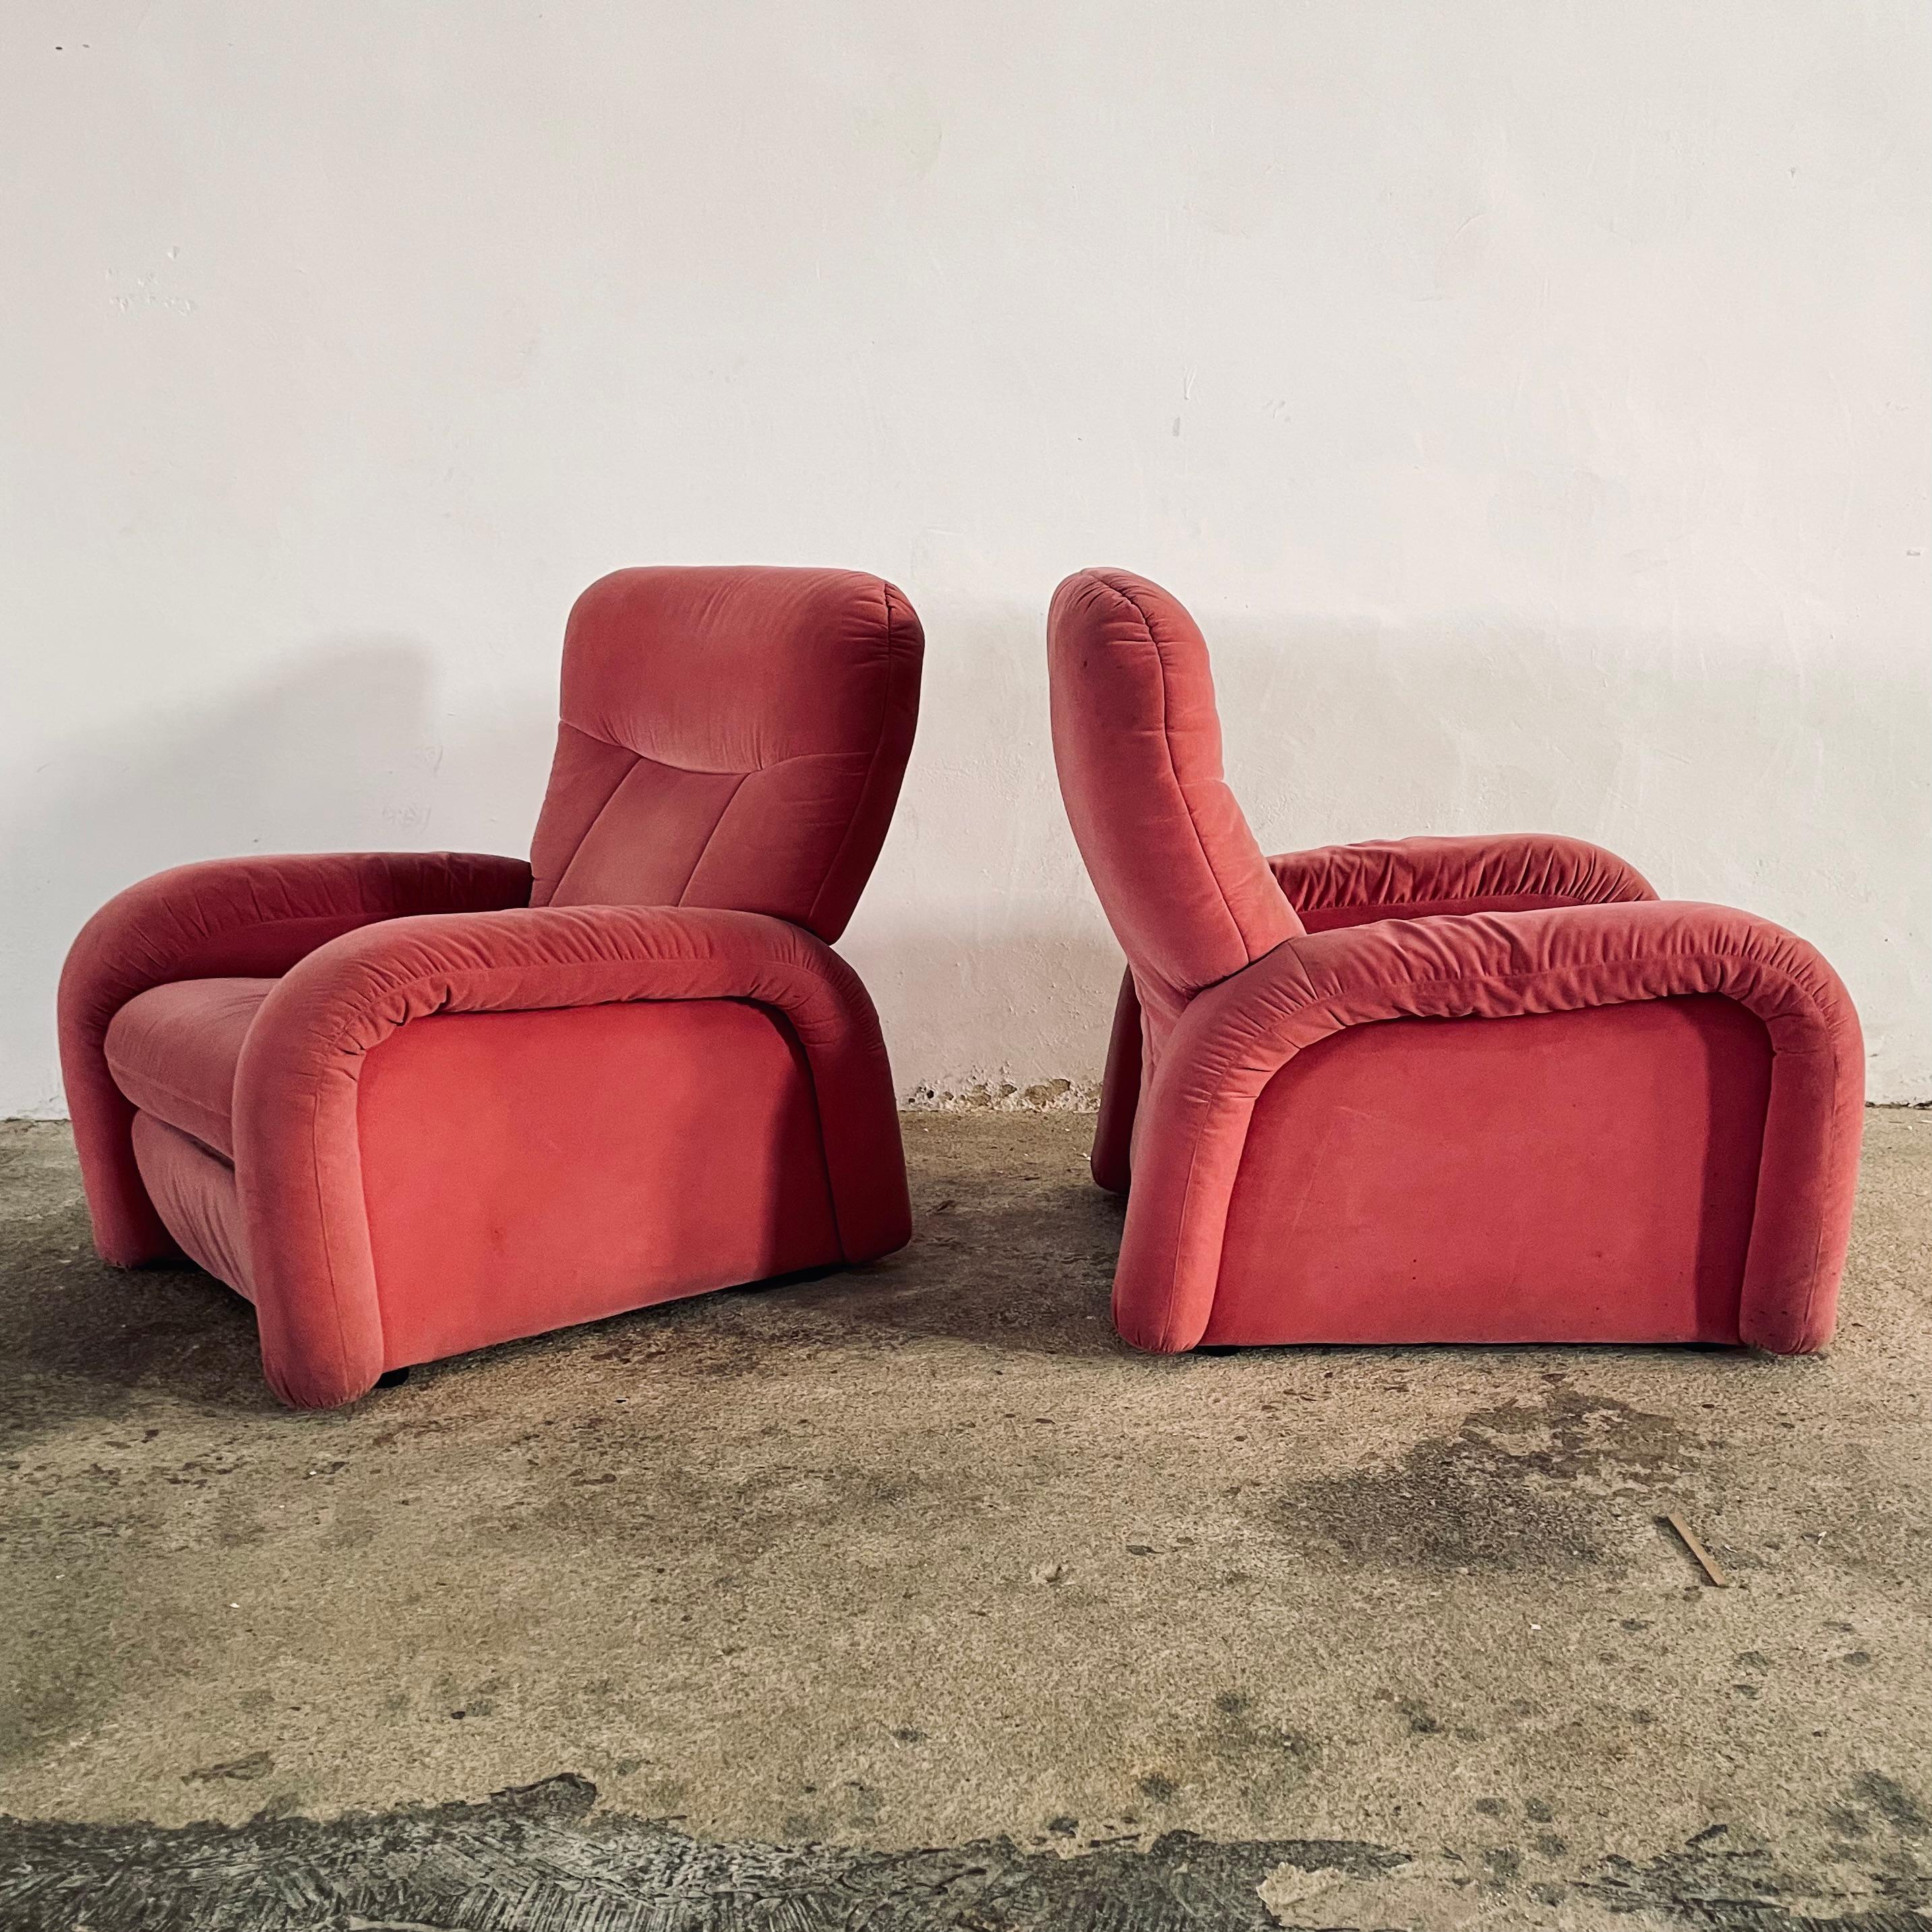 Vintage Italian Arch Reclining Lounge Chairs, Original Upholstery, Italy, 1950s For Sale 6